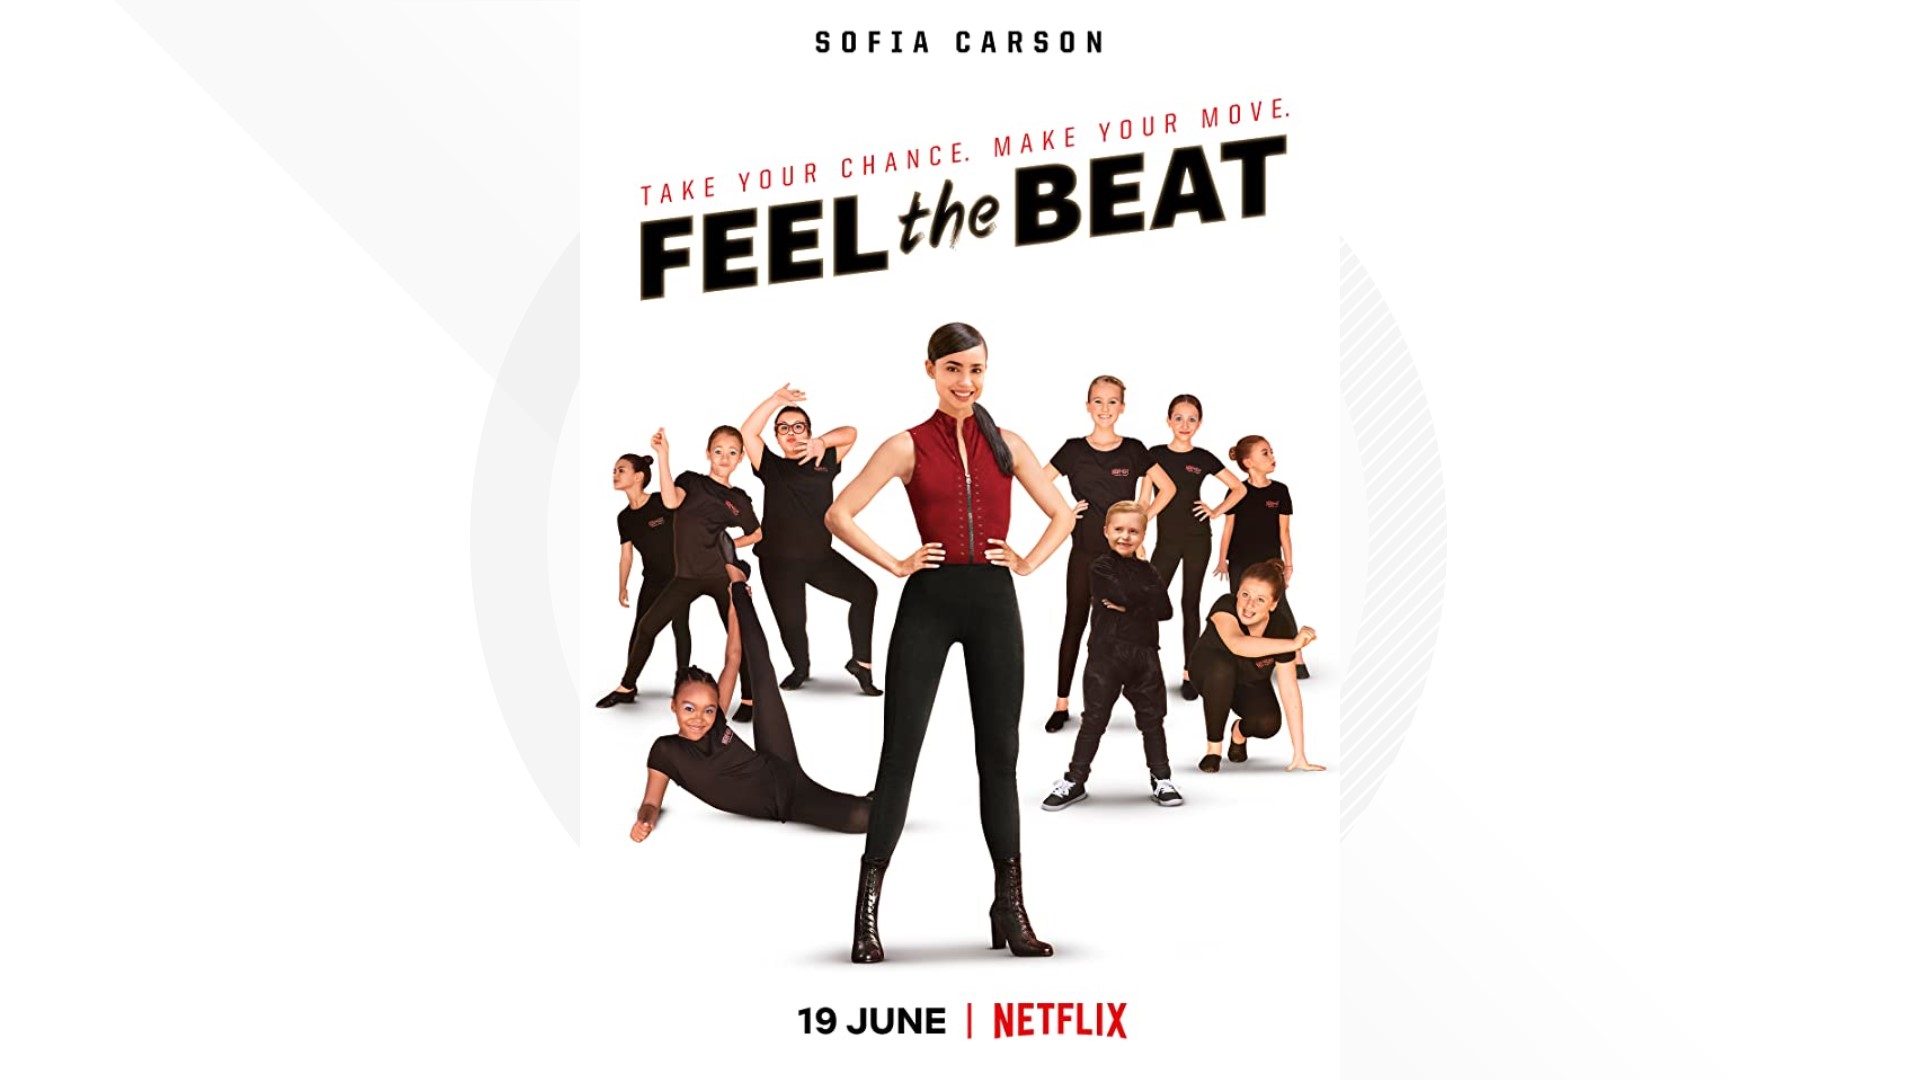 Our Box Office Mom Jackie Solberg reviews the Netflix original movie "Feel the Beat."